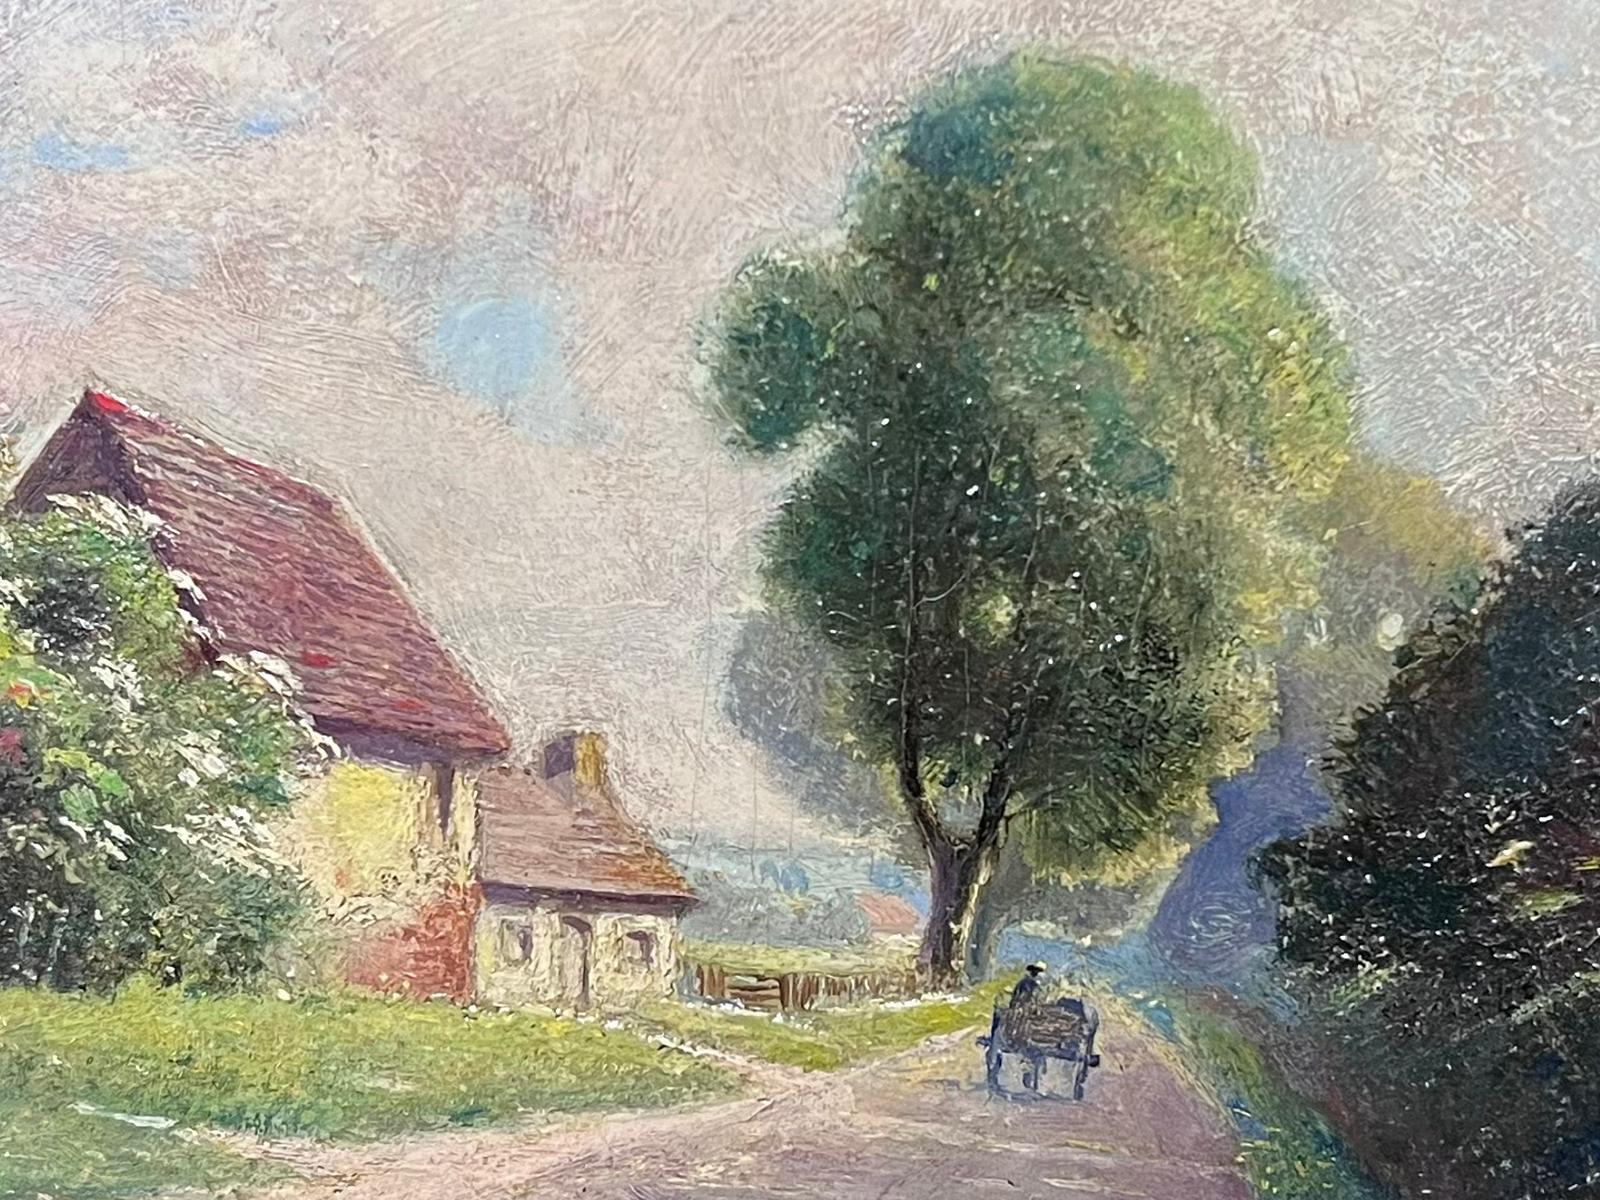 The Village Lane
British artist, early 20th century
oil on board, framed
framed: 7 x 8.5 inches 
board: 6 x 7.5 inches
provenance: private collection, England
condition: very good and sound condition 